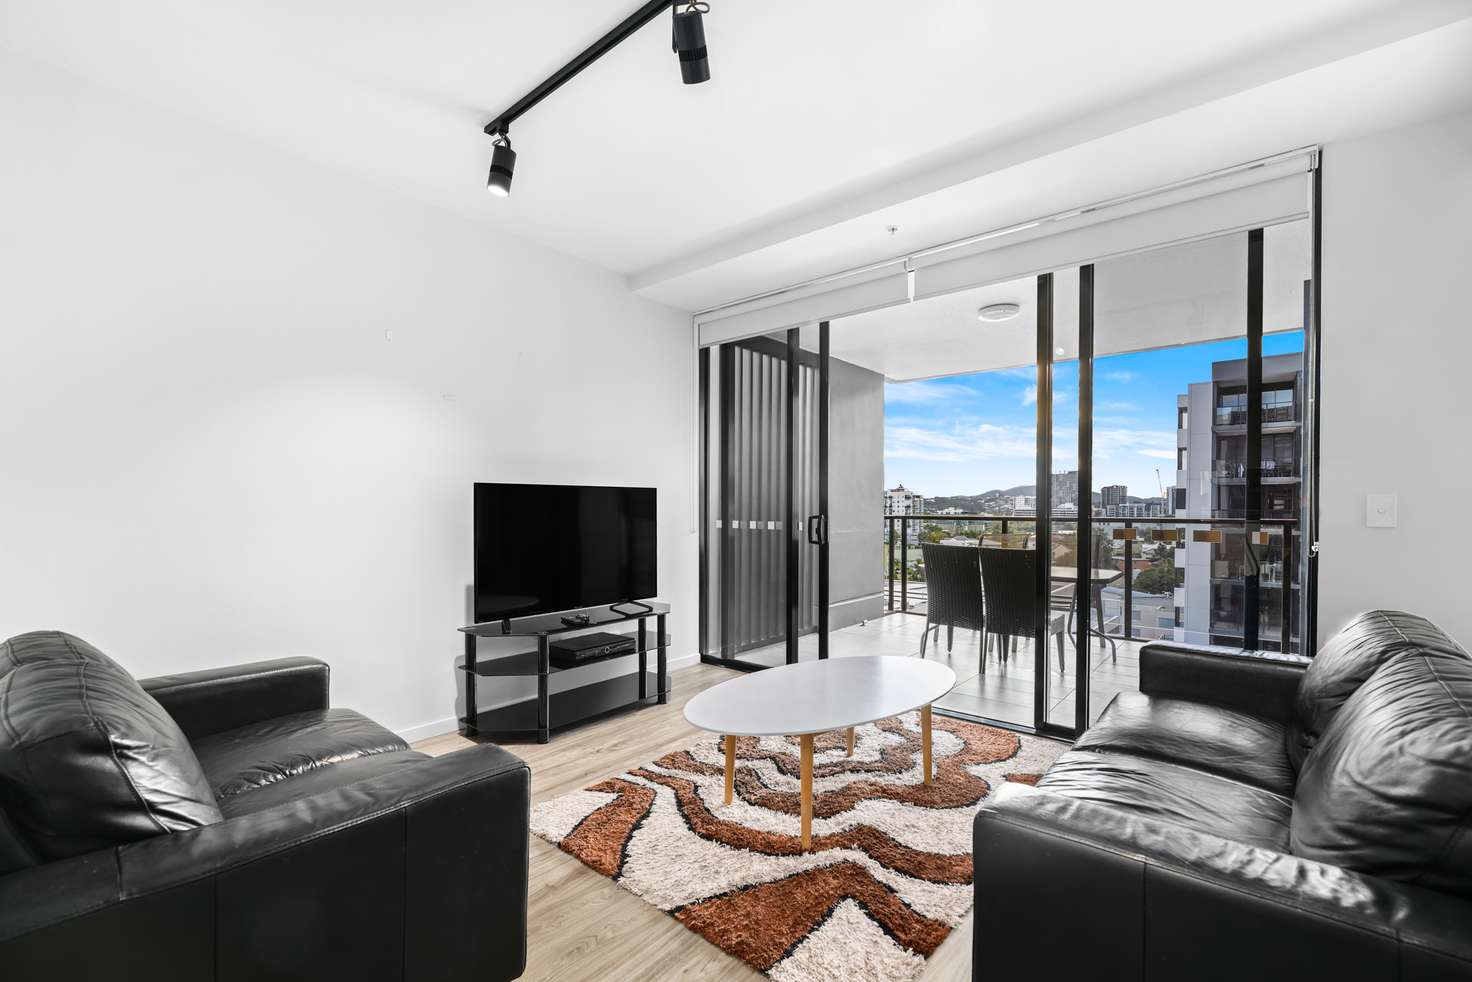 Main view of Homely apartment listing, 1088/9 Edmondstone St, South Brisbane QLD 4101